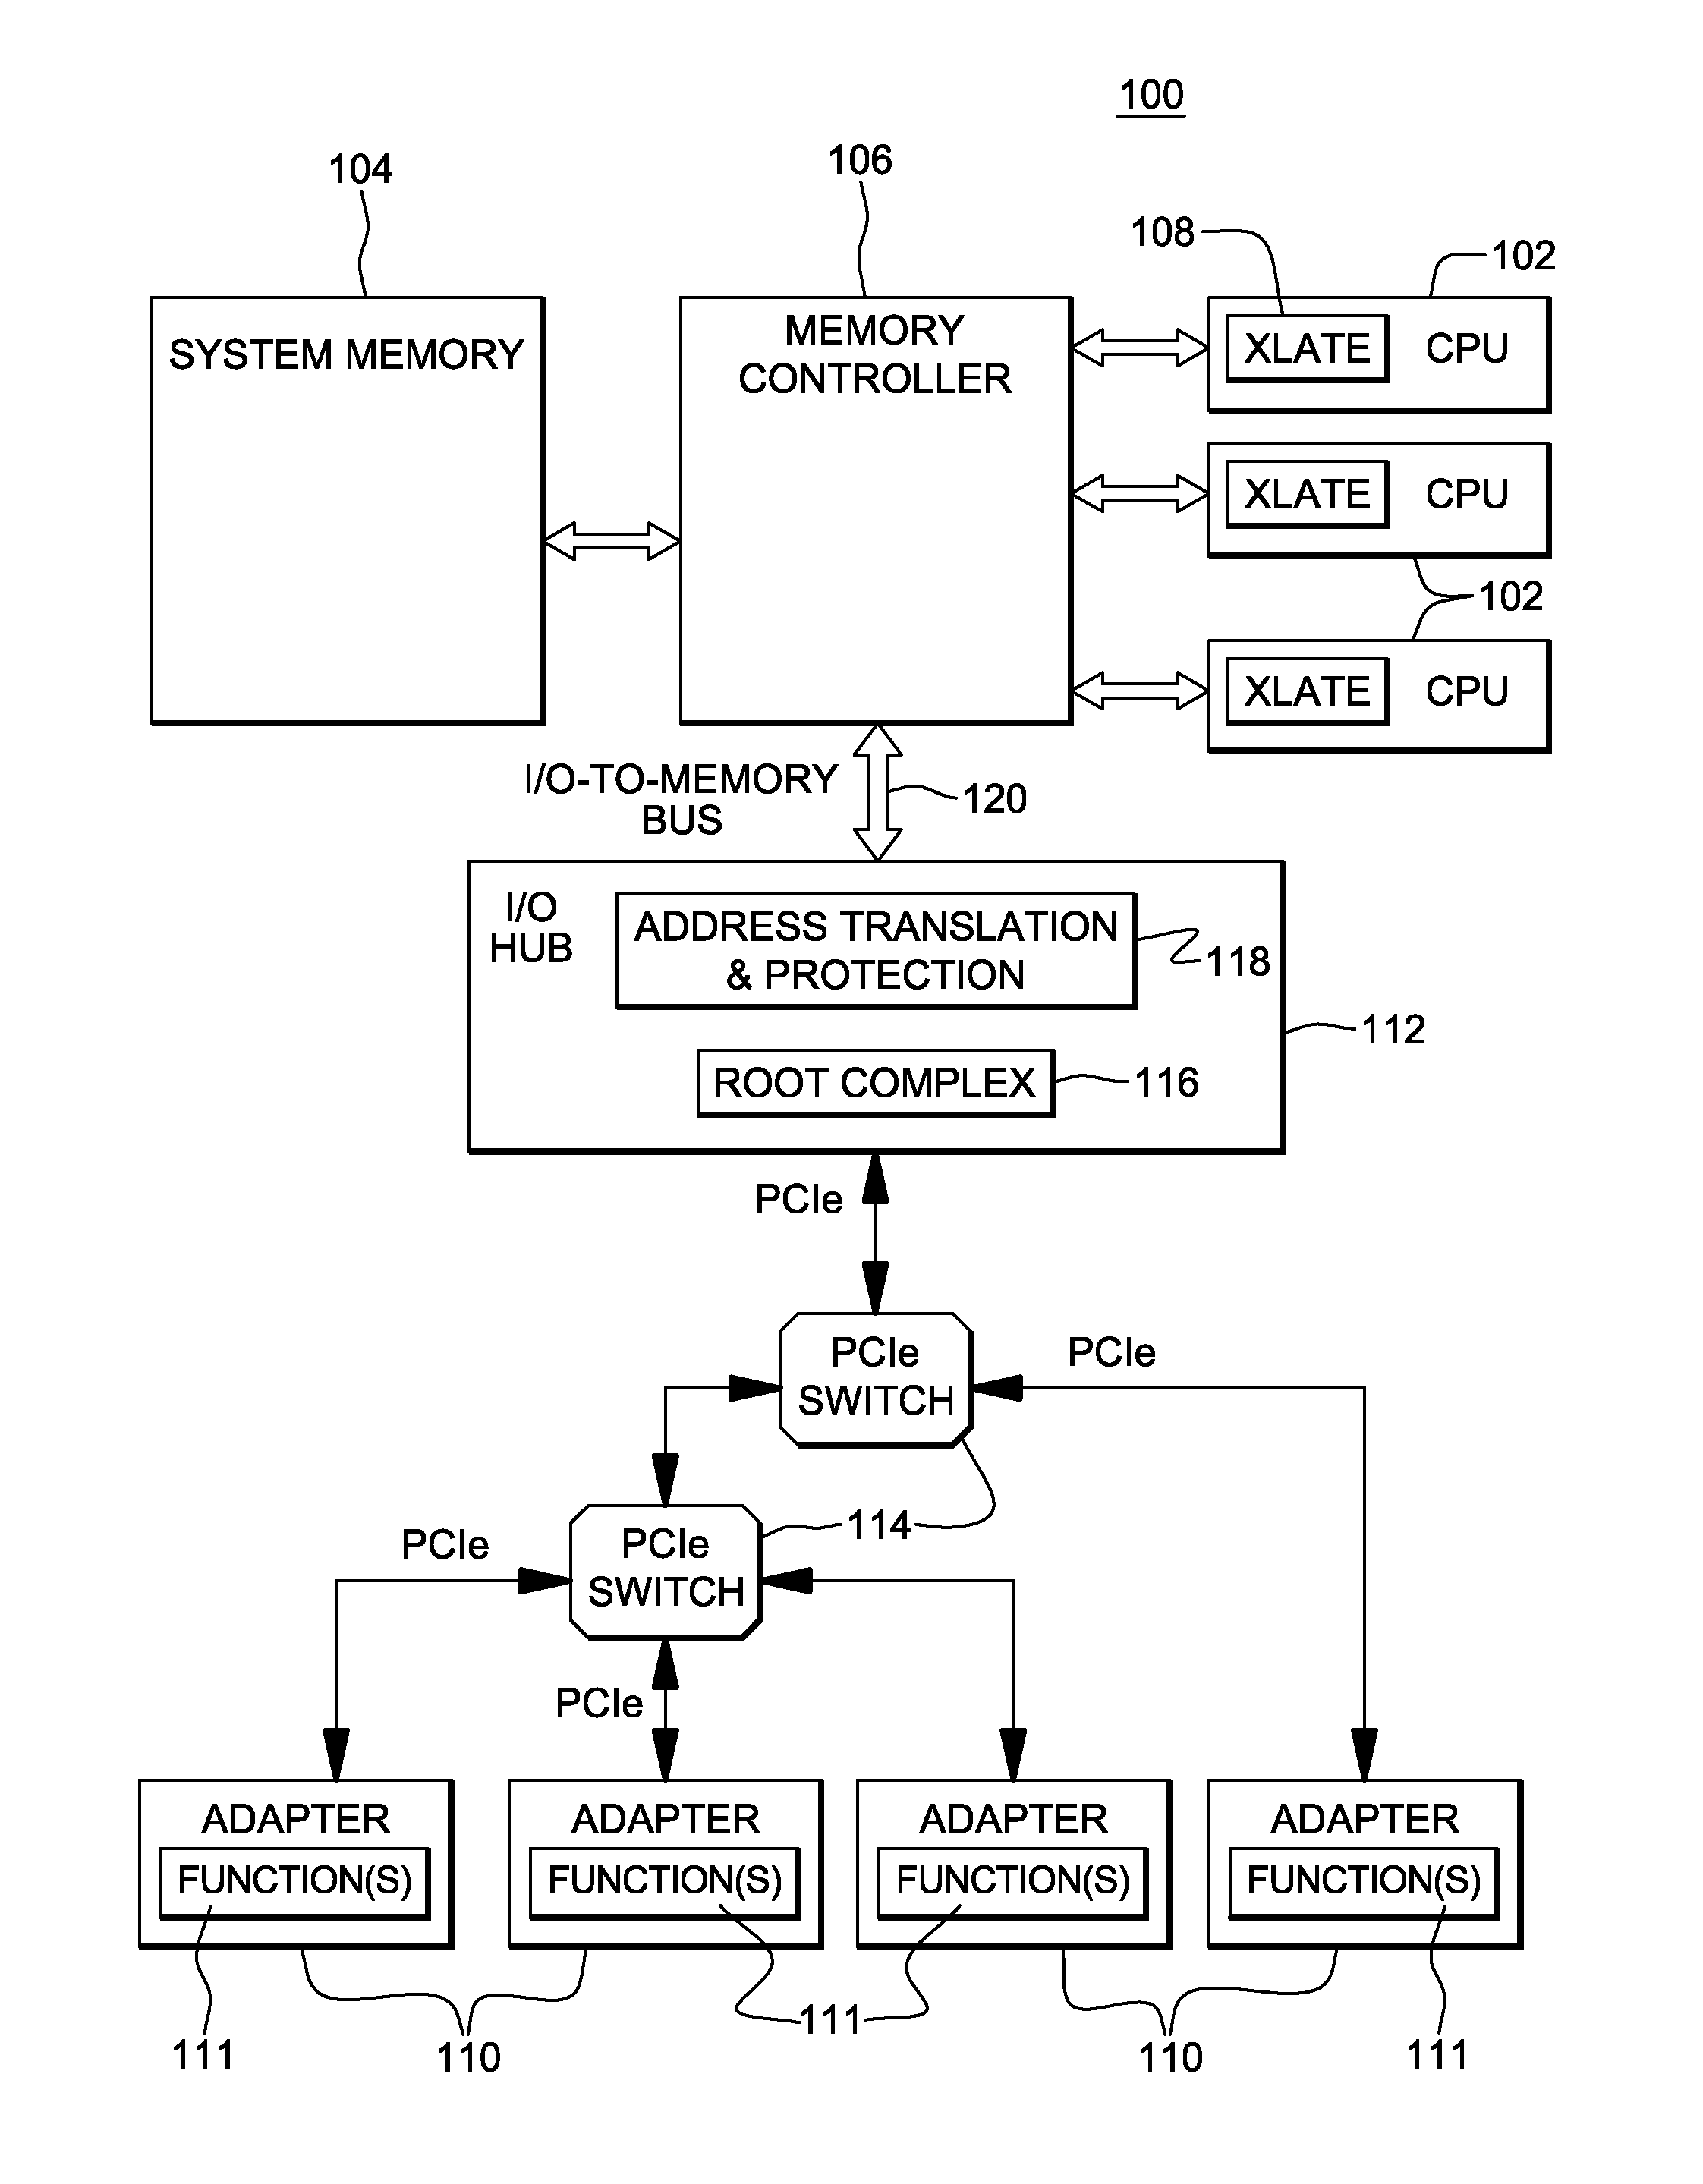 Measurement facility for adapter functions